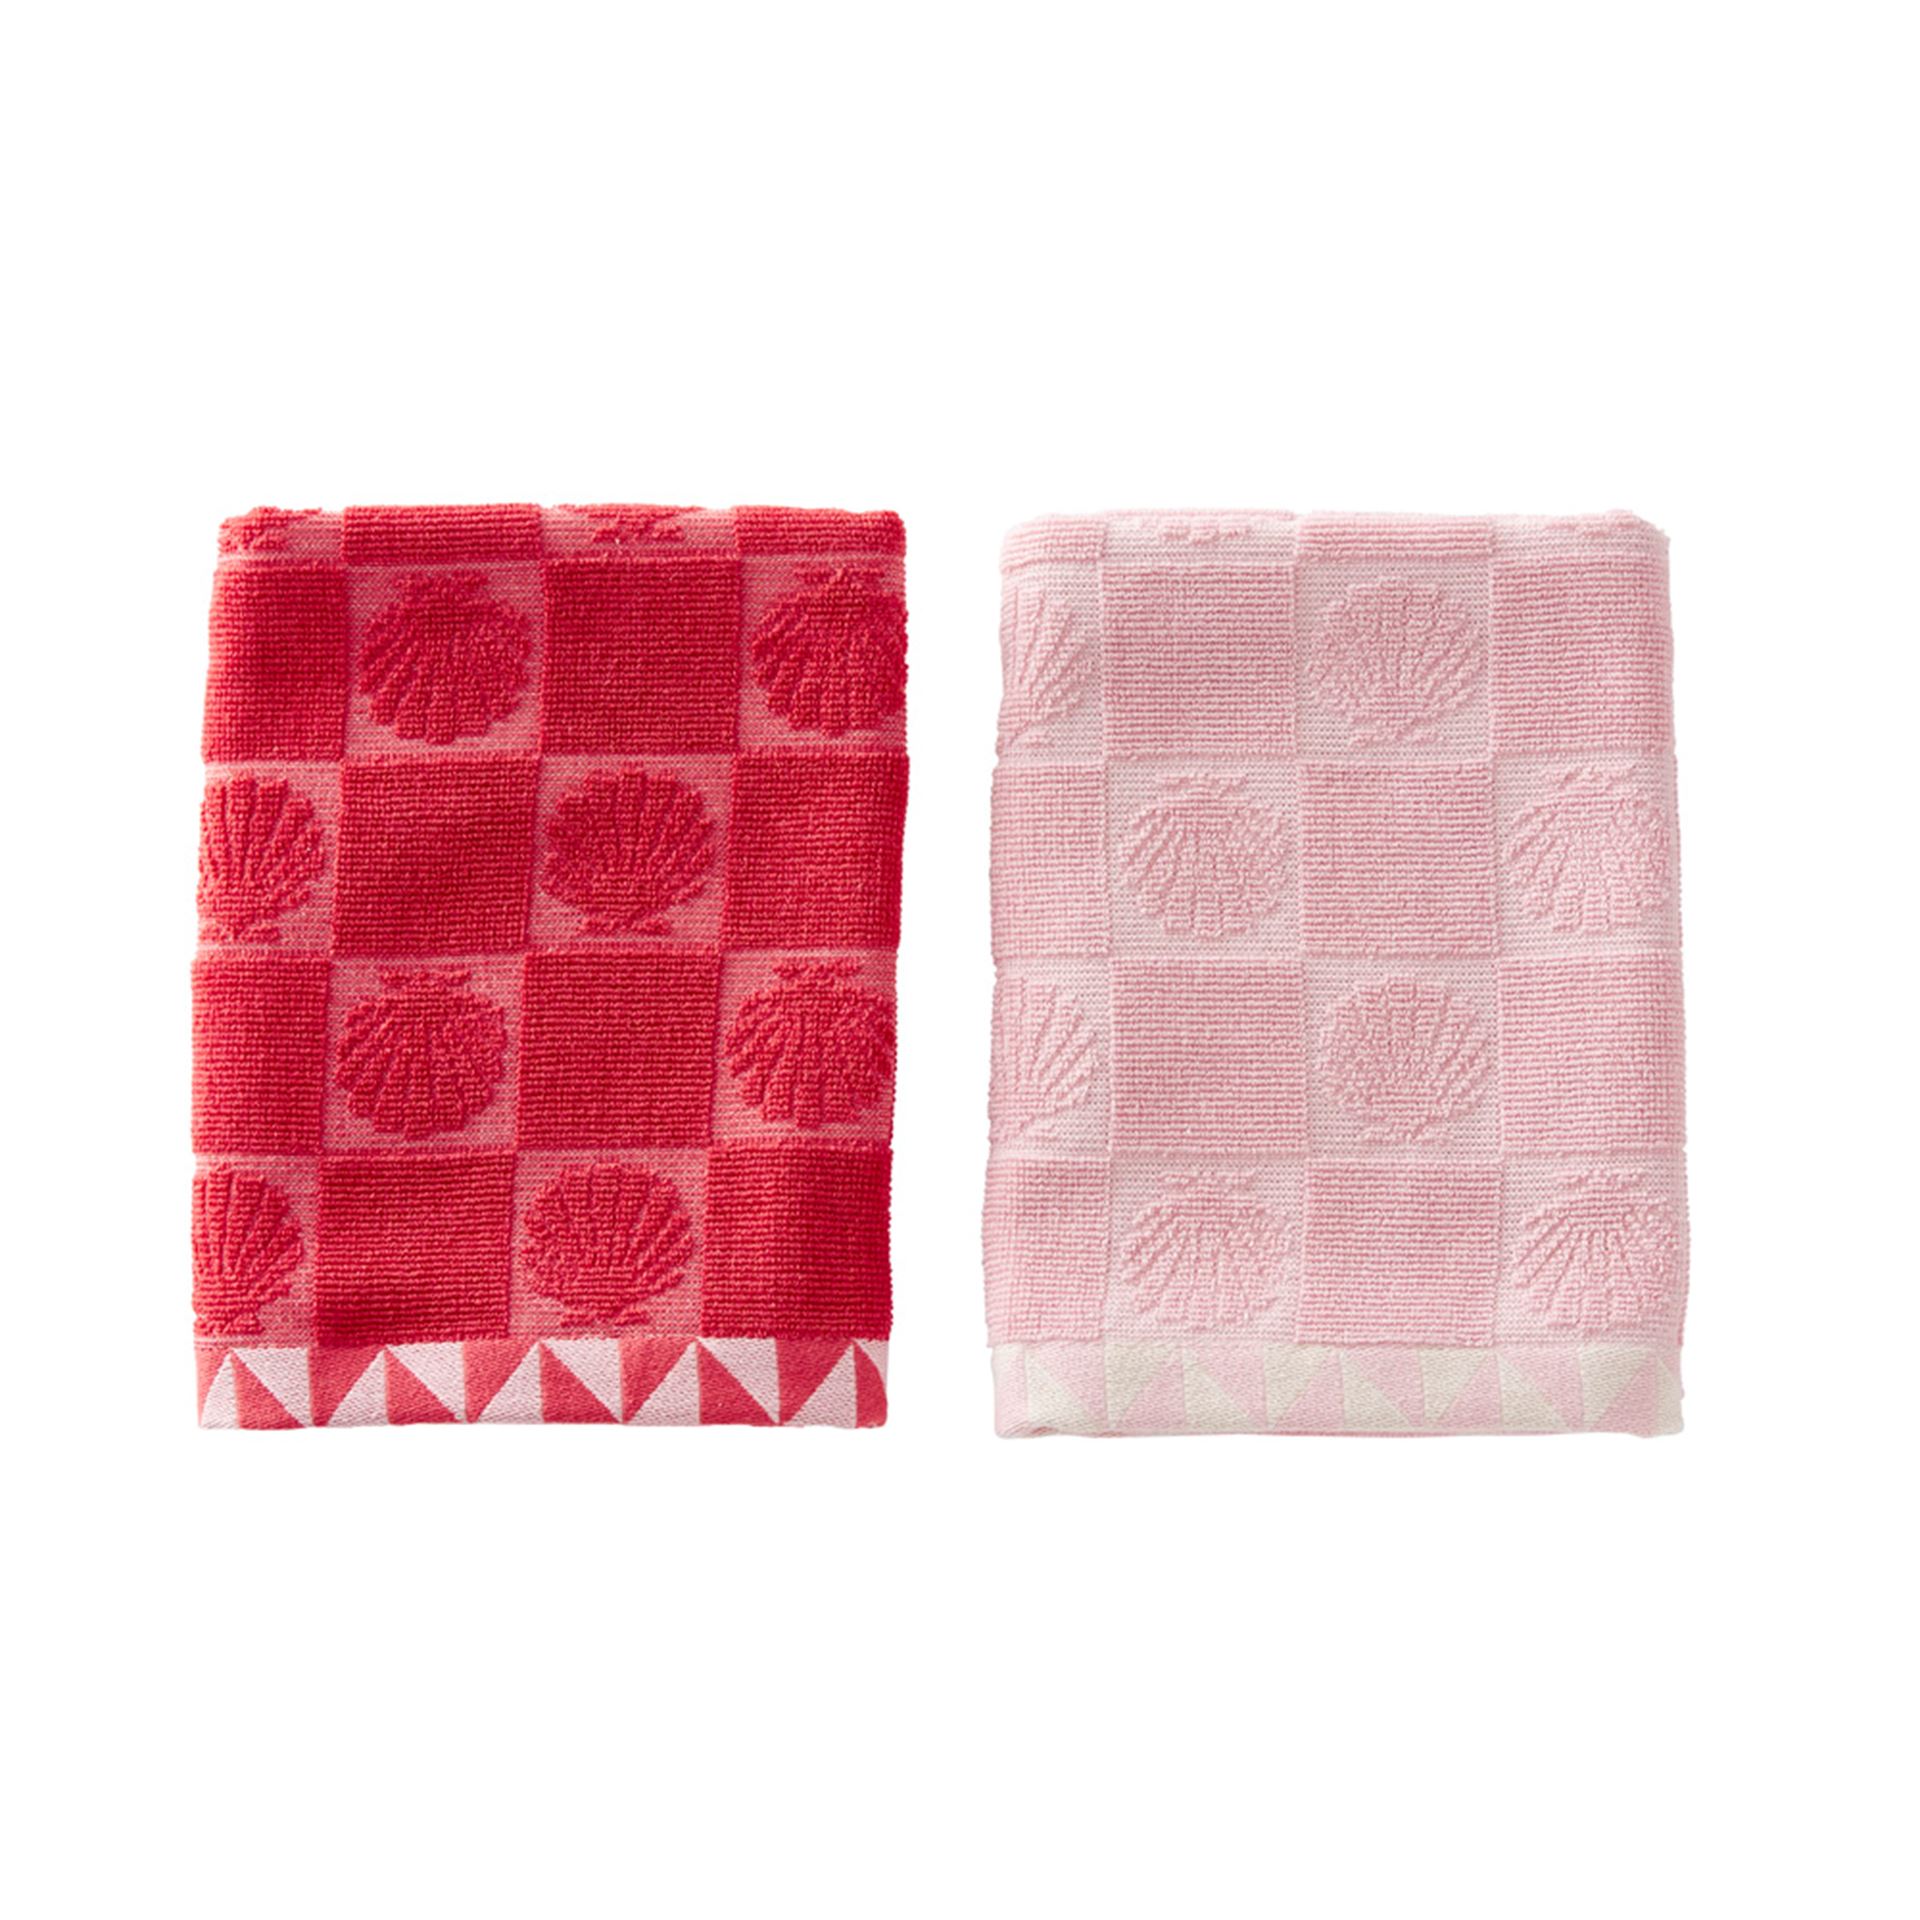 https://www.adairs.com.au/globalassets/13.-ecommerce/03.-product-images/2023_images/homewares/tea-towel--dish-cloths/56362_strawberry_01.jpg?width=1920&mode=crop&heightratio=1&quality=80